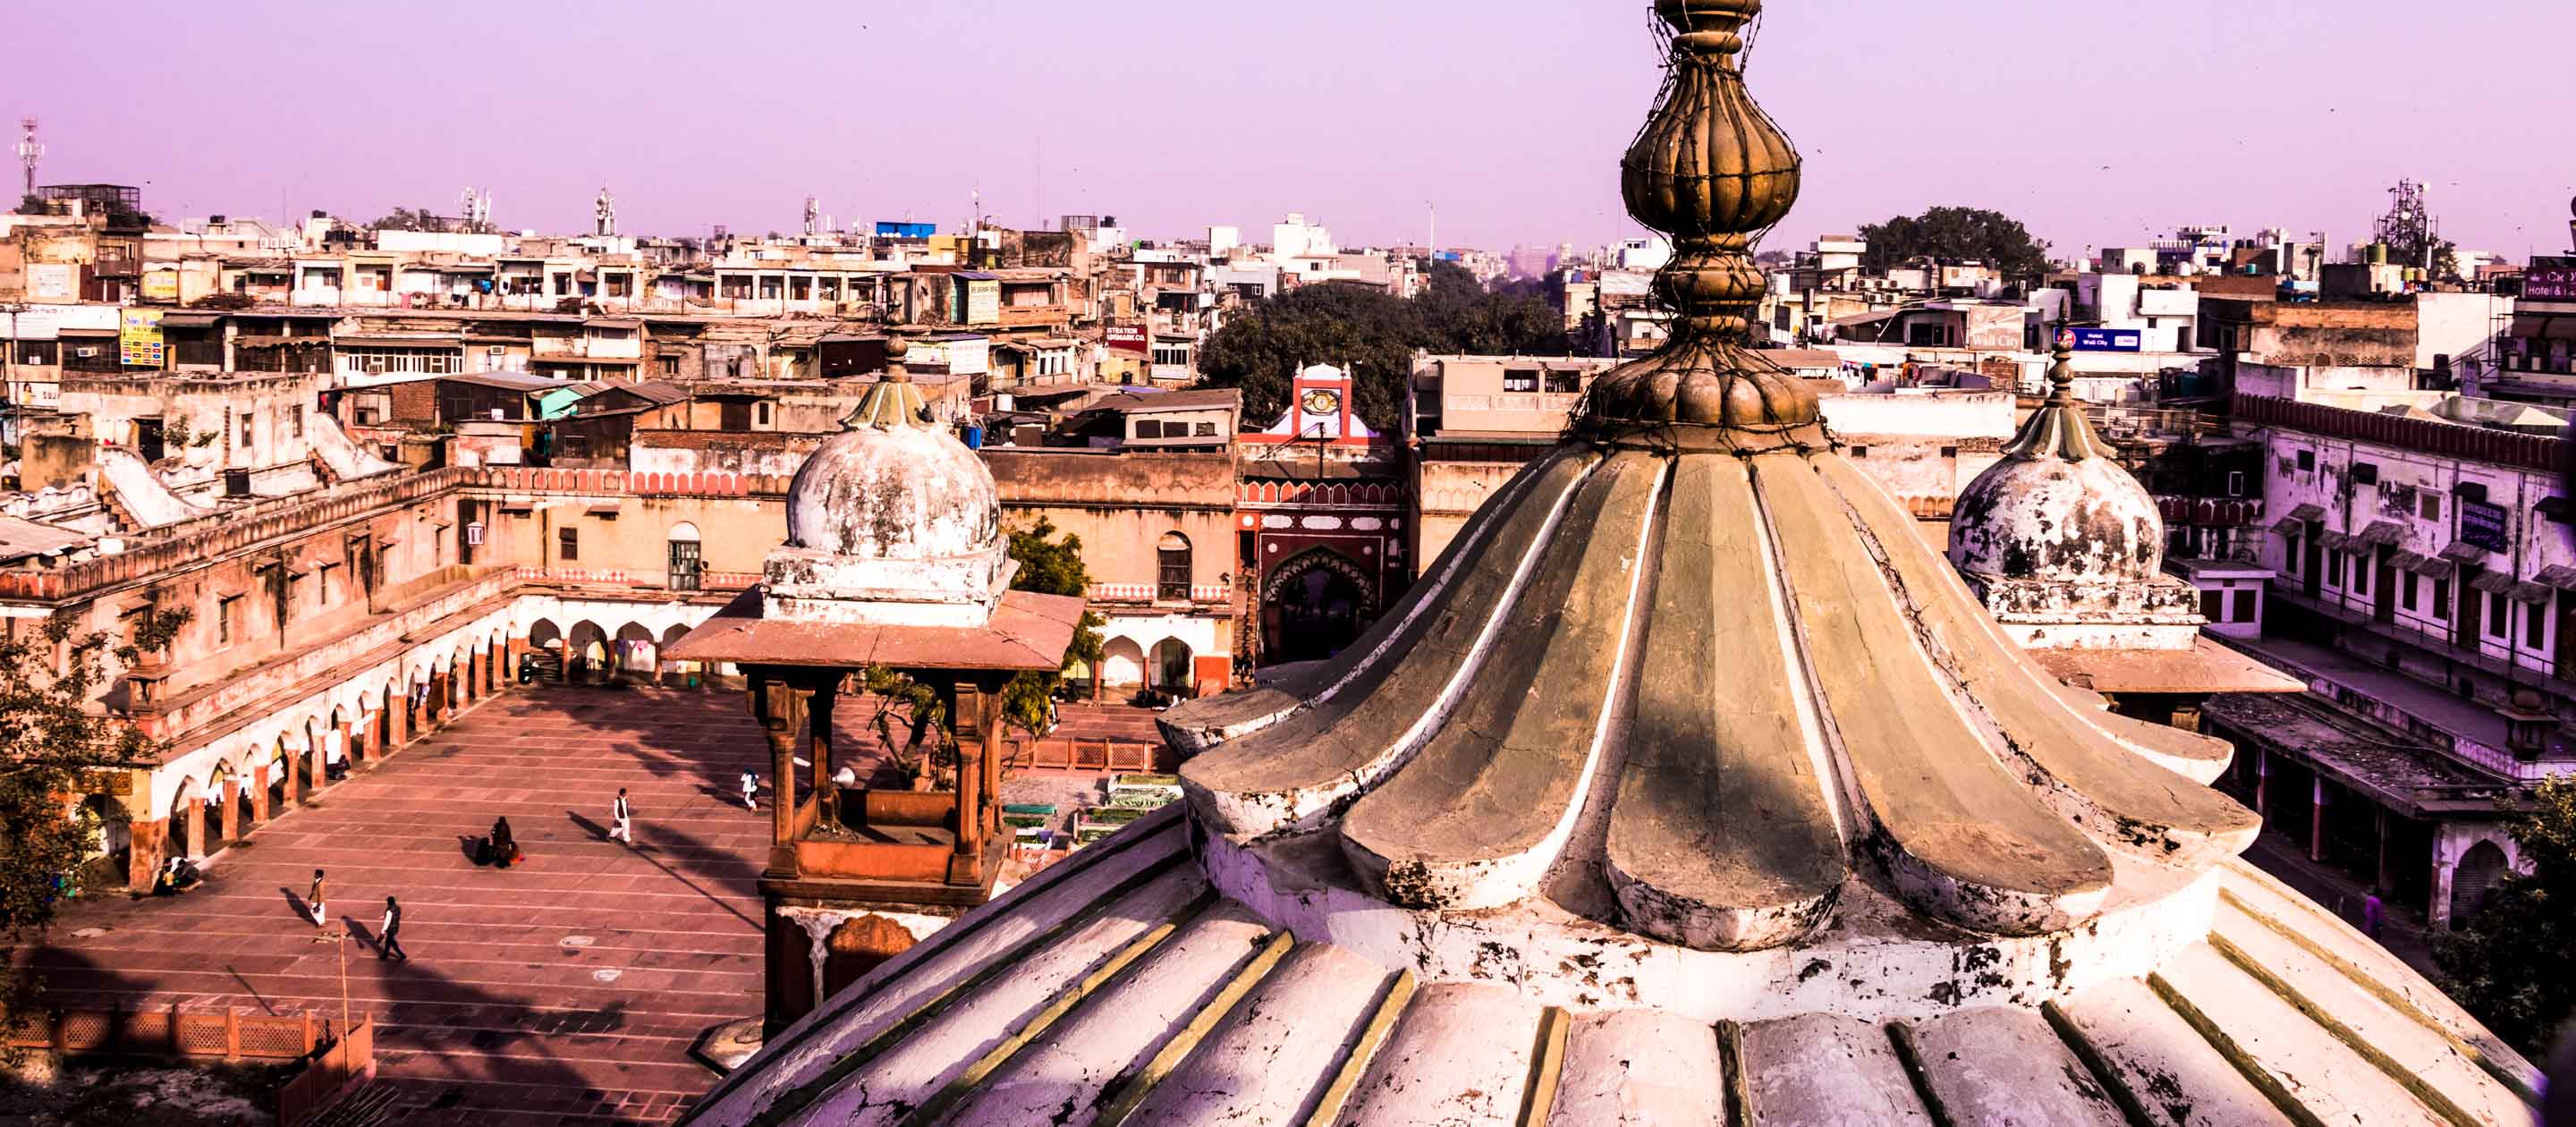 View over Old Delhi, India rooftops